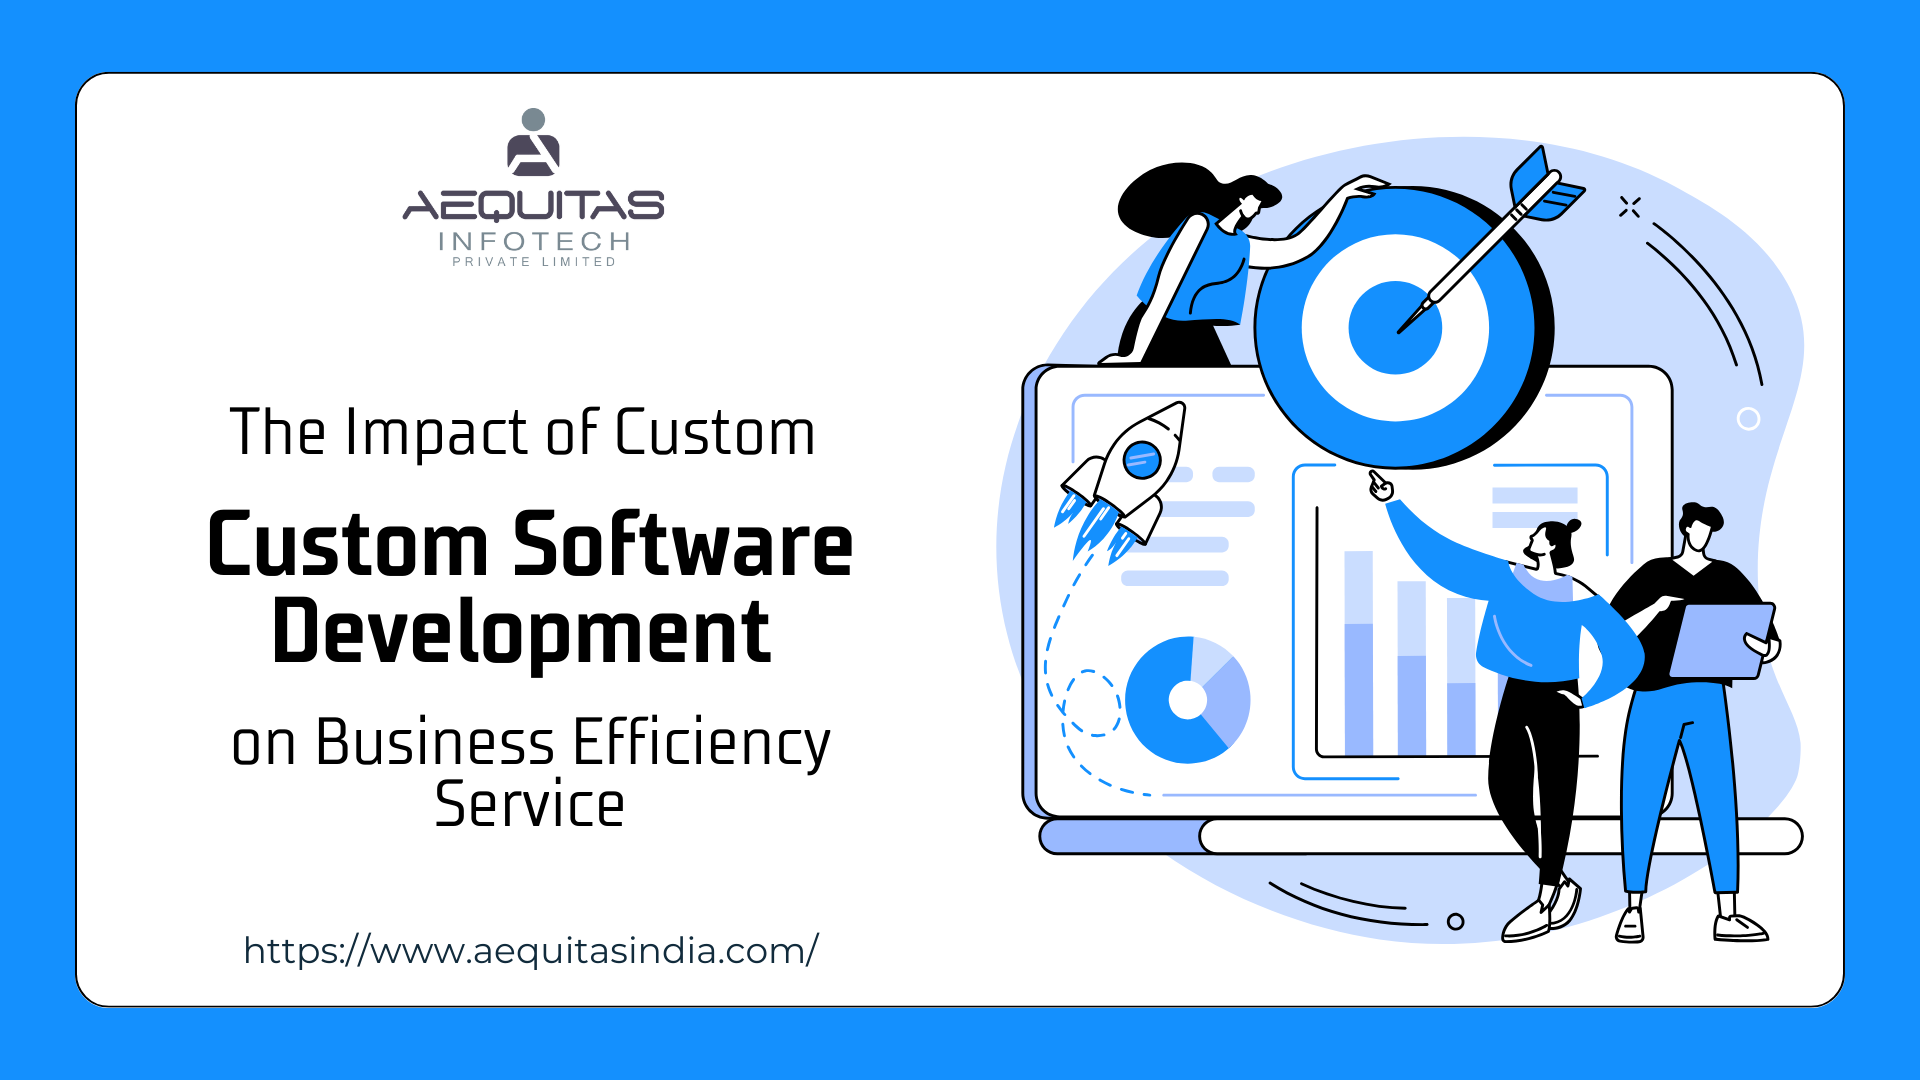 The Impact of Custom Software Development on Business Efficiency